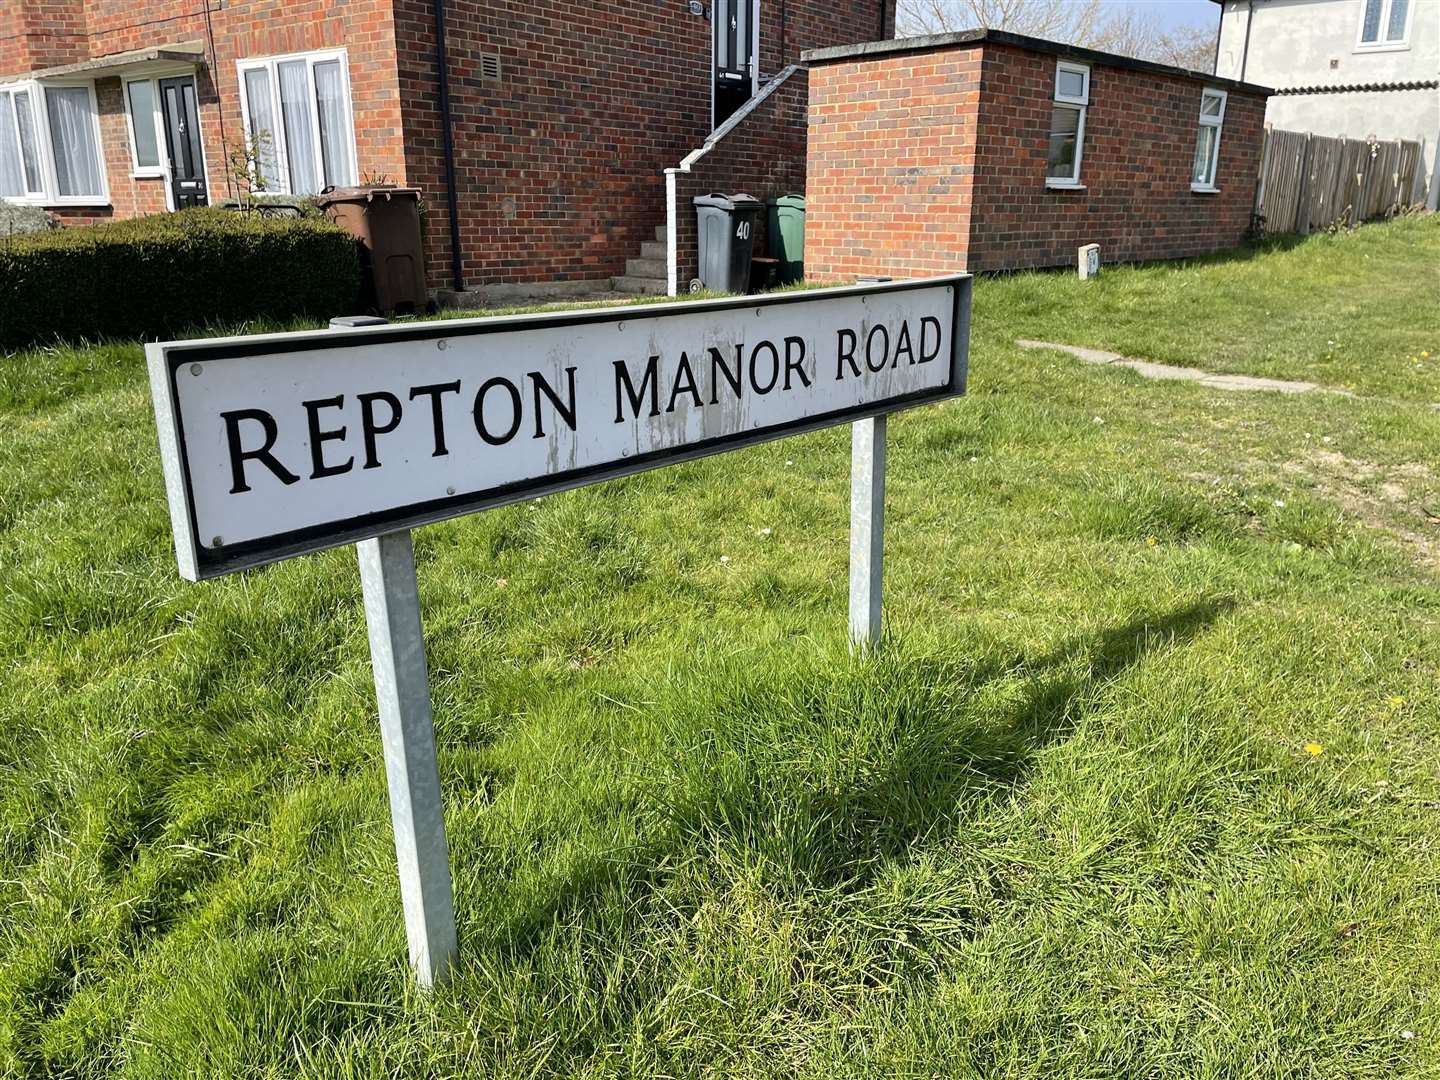 Emergency services were called to Repton Manor Road in Ashford